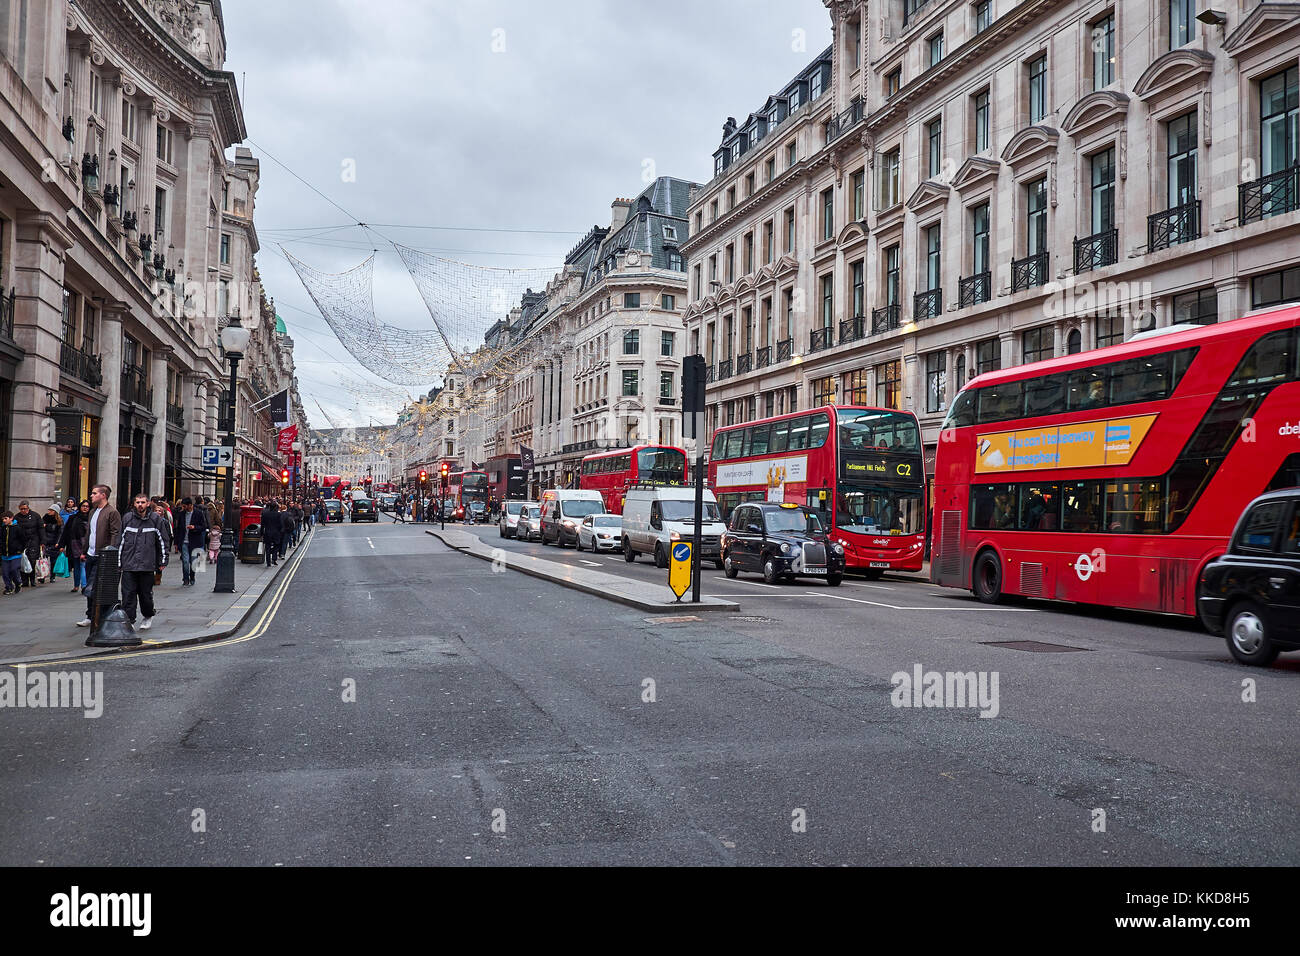 LONDON CITY - DECEMBER 23, 2016: Regent Street decorated for Christmas with a lot of traffic, both people and vehicles Stock Photo